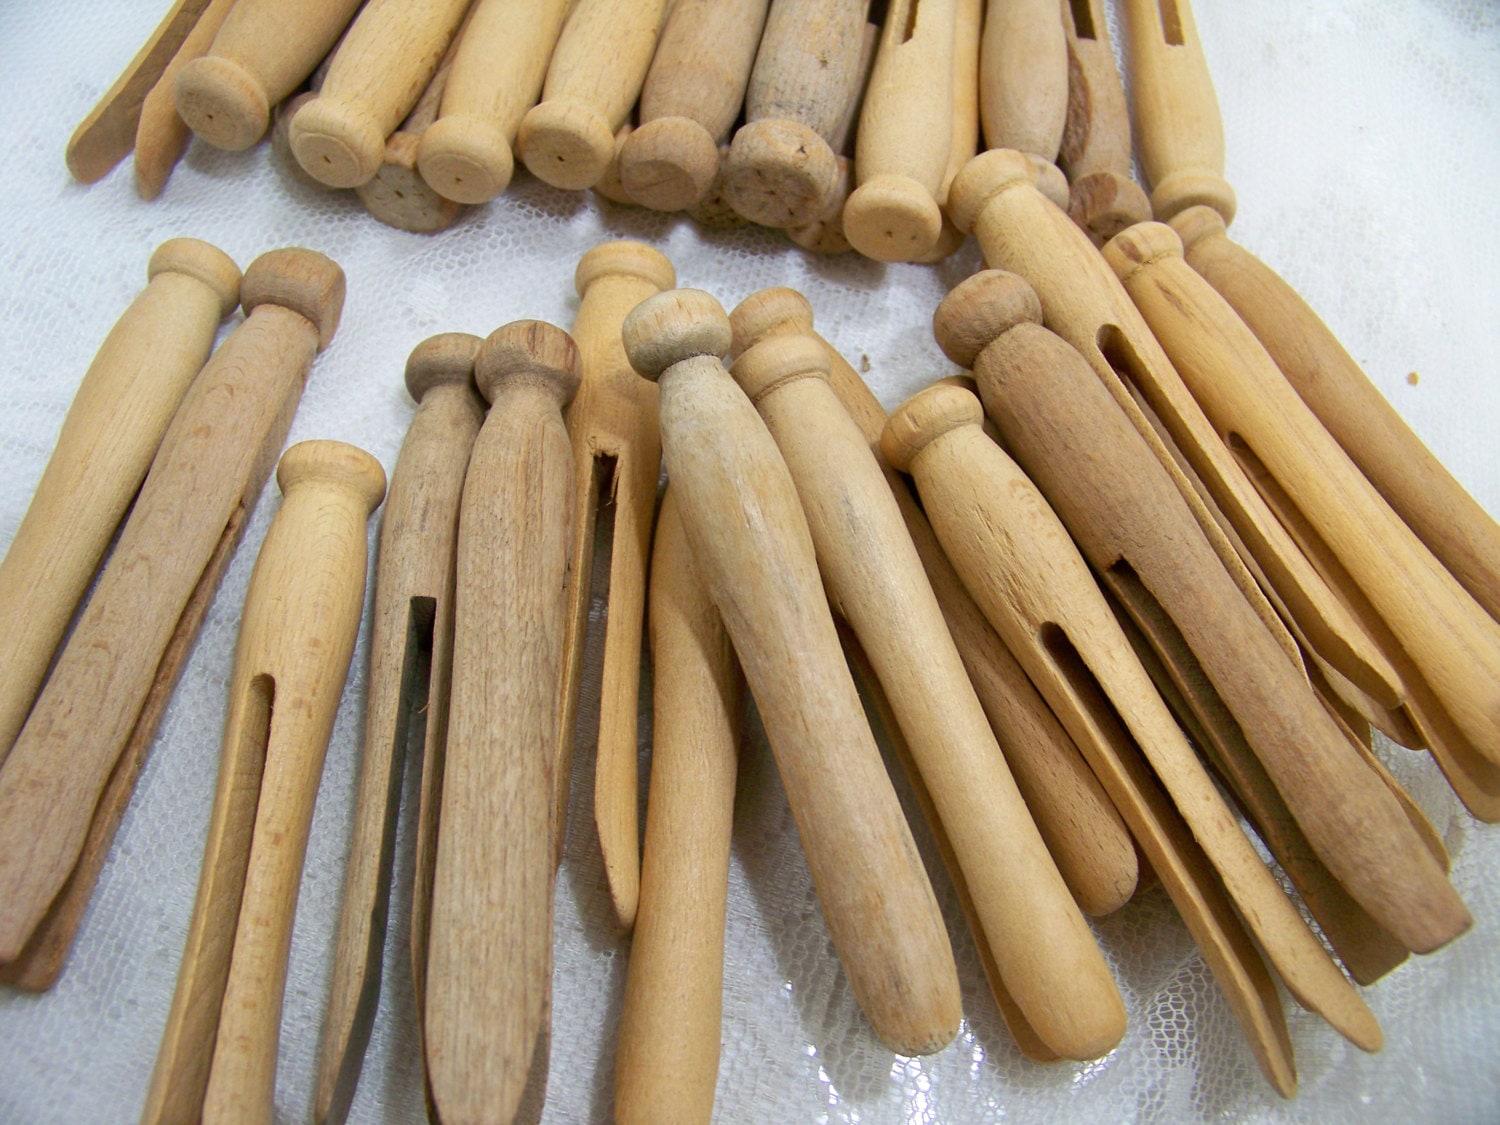 24 Vintage 3” Wood Clothes Pins Wooden Craft Air Dry Laundry